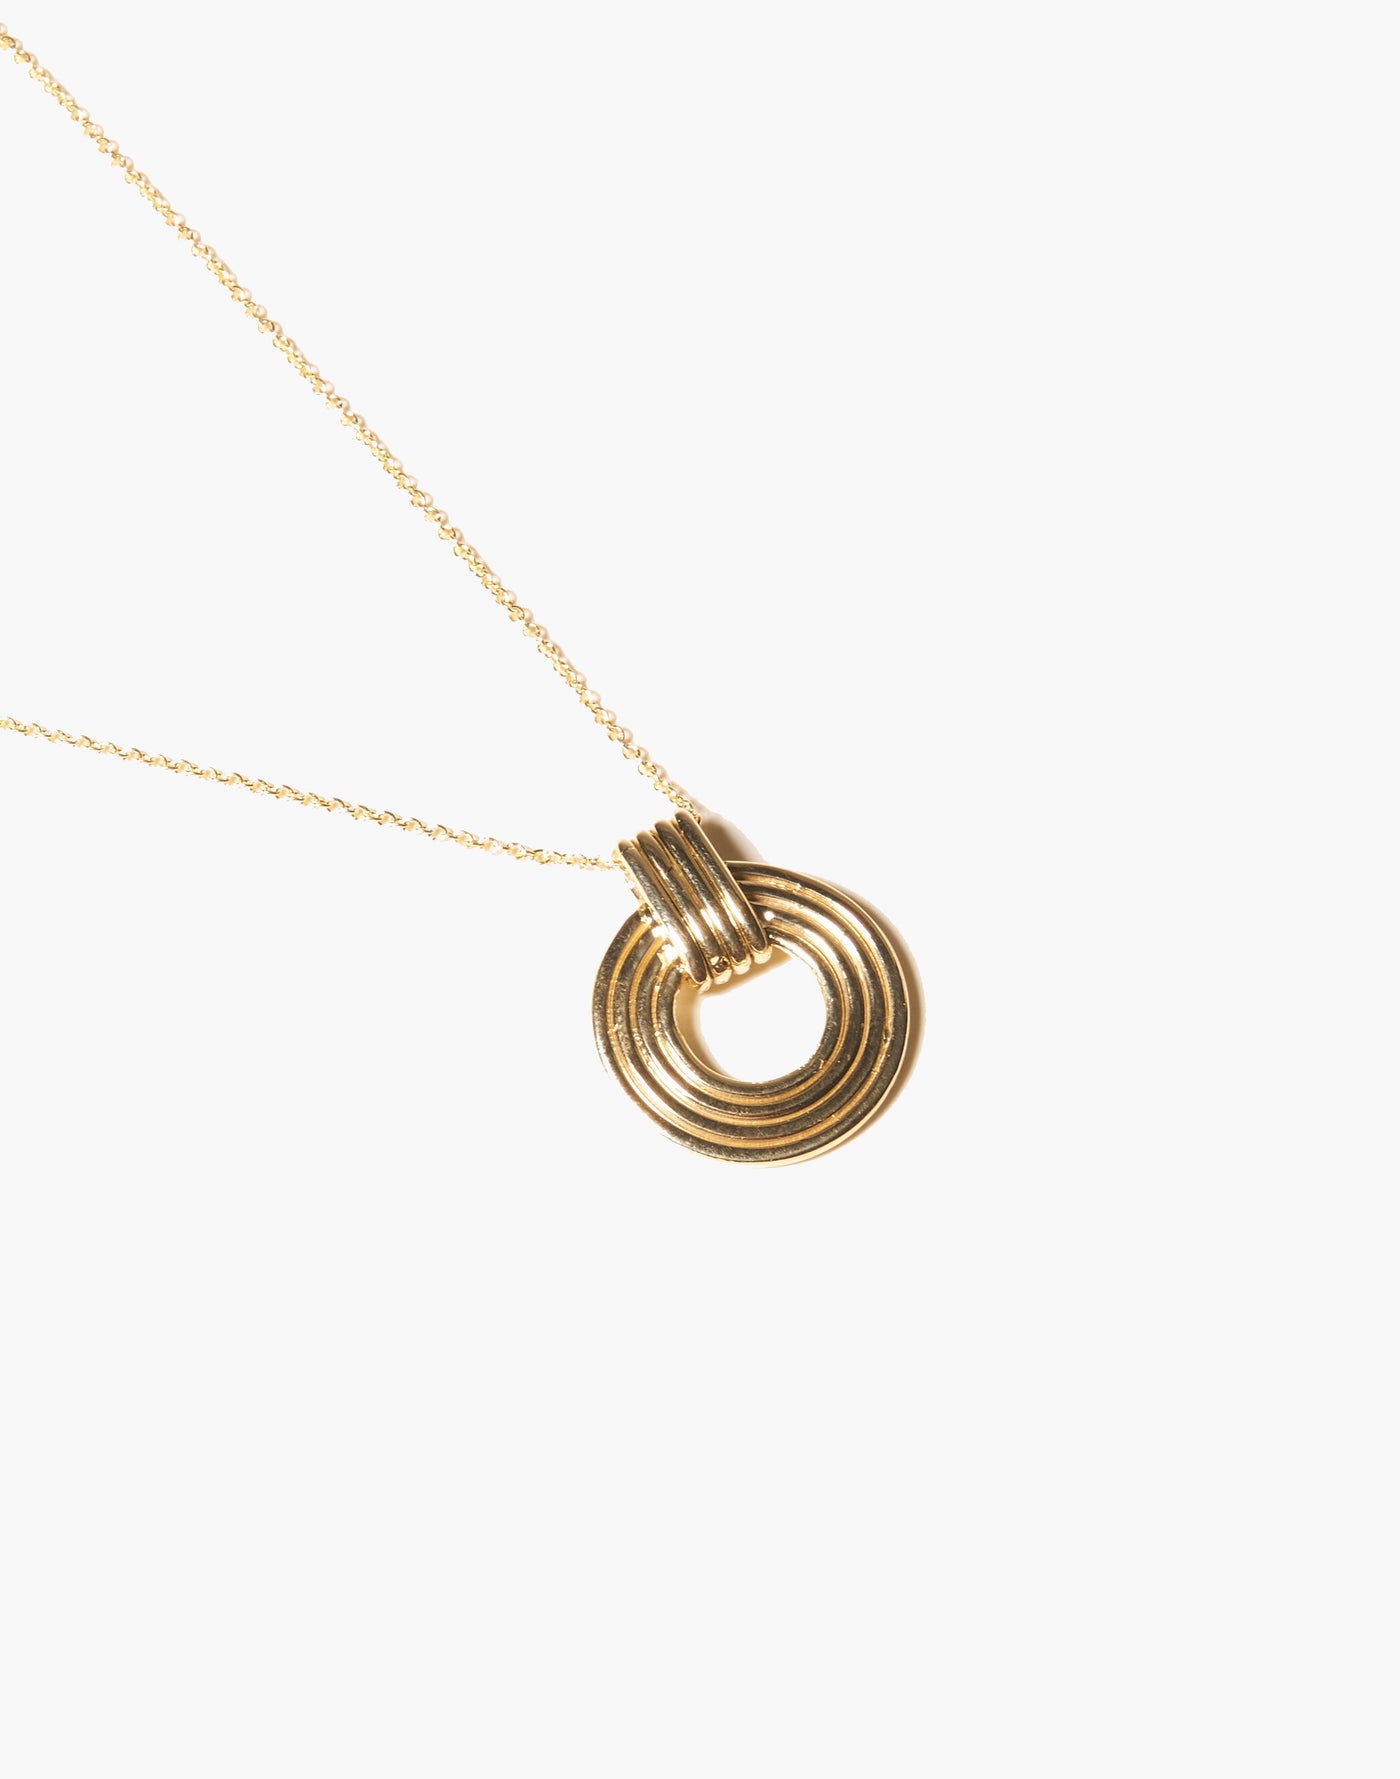 HELIOS NECKLACE IN BRASS - Romi Boutique